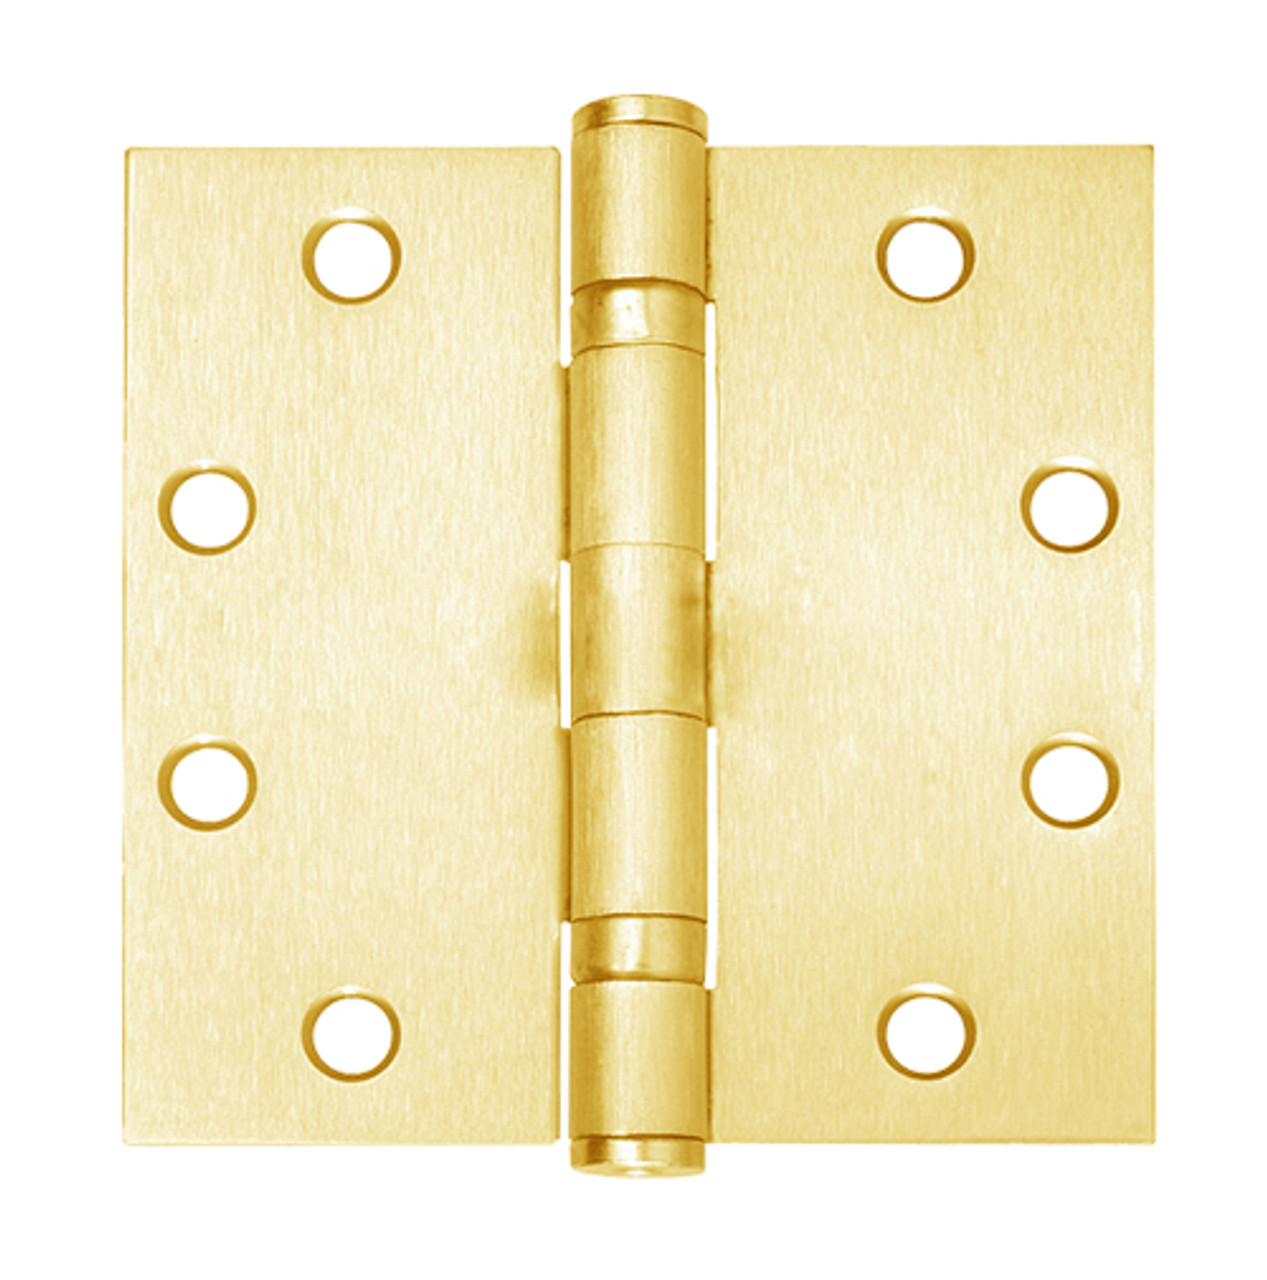 5BB1-5x5-632-NRP IVES 5 Knuckle Ball Bearing Full Mortise Hinge in Bright Brass Plated